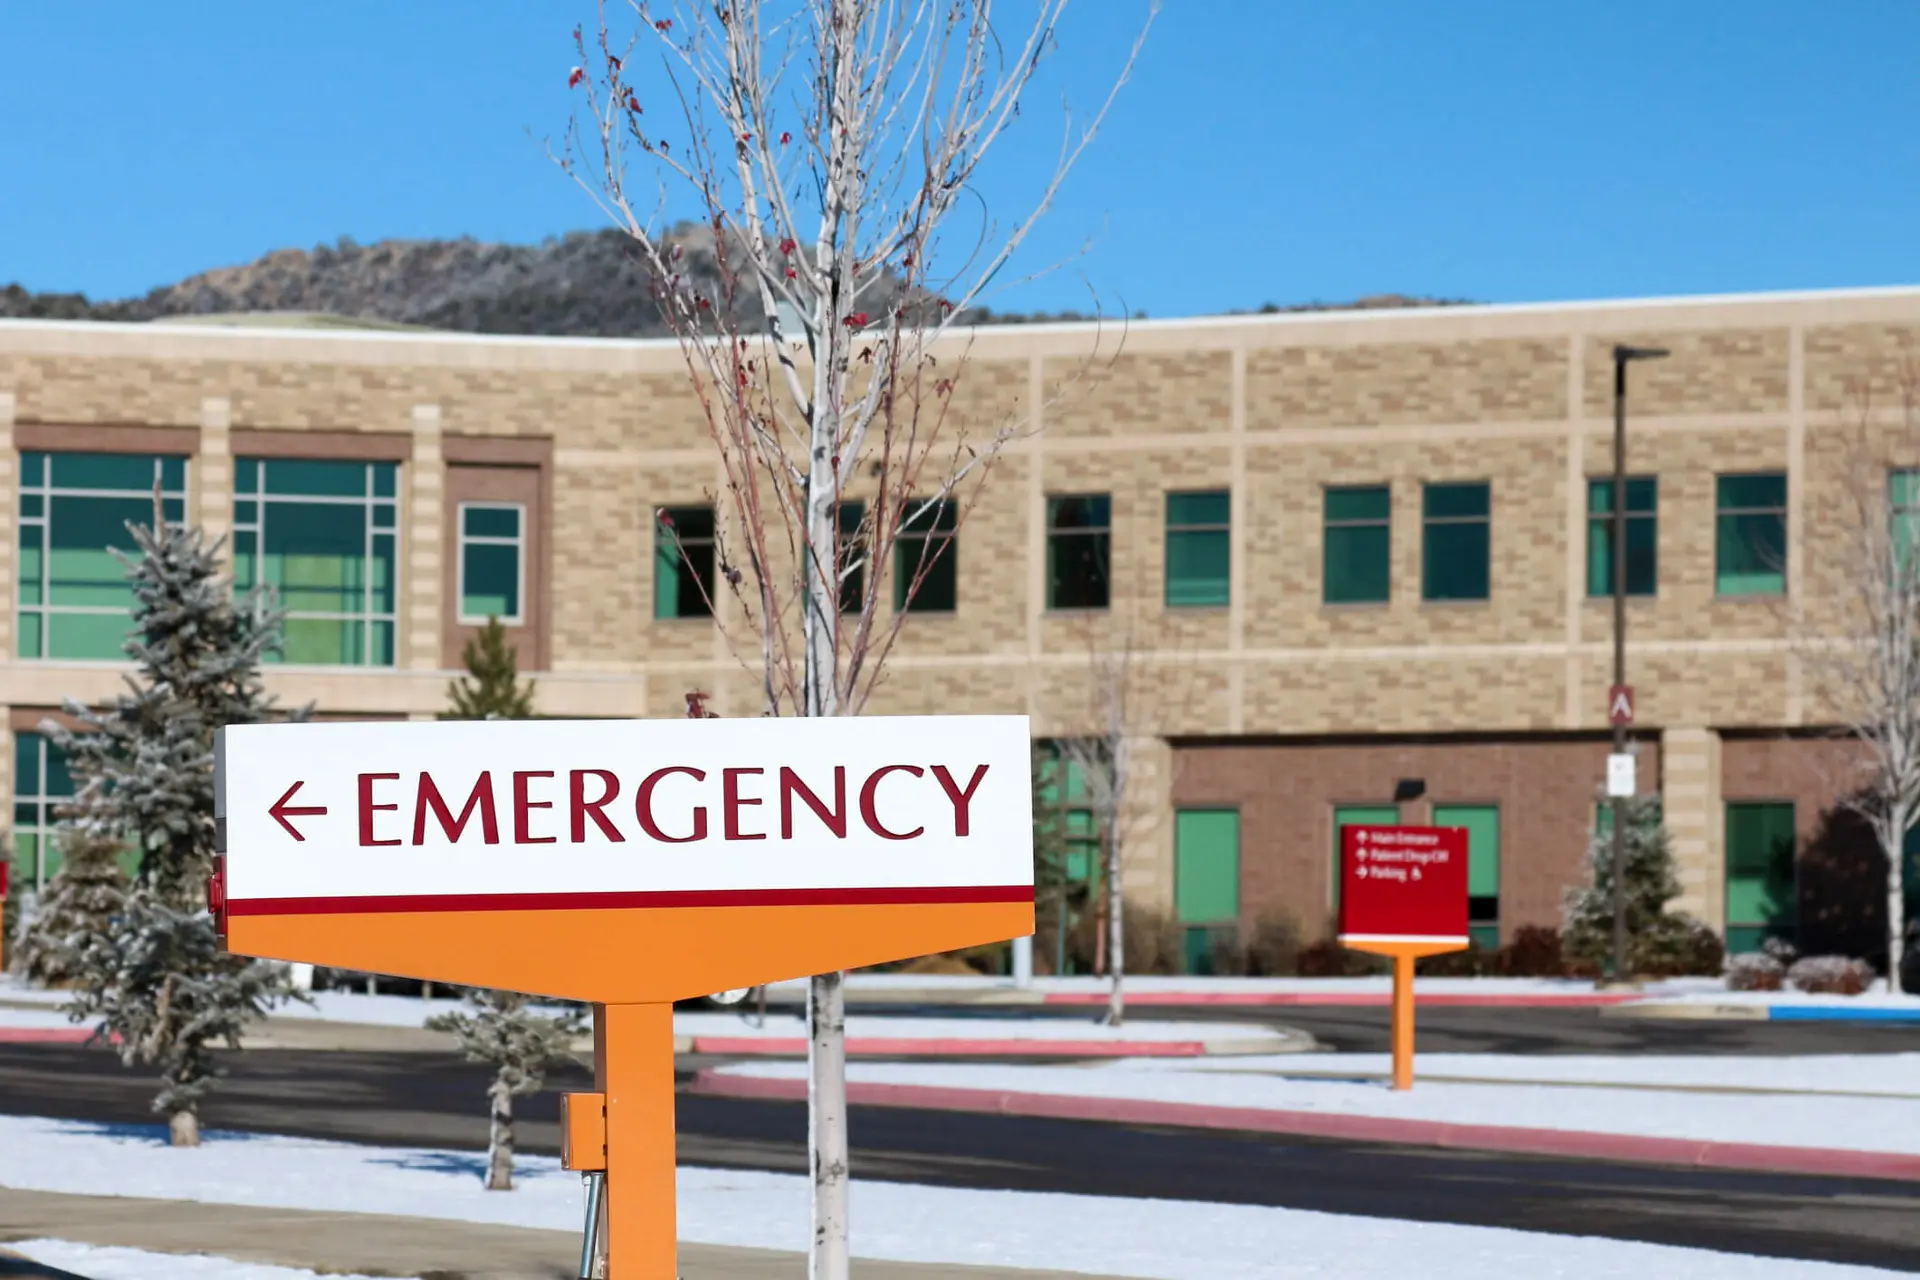 emergency room signage in front of a hospital on a snowy winter day during the holiday season